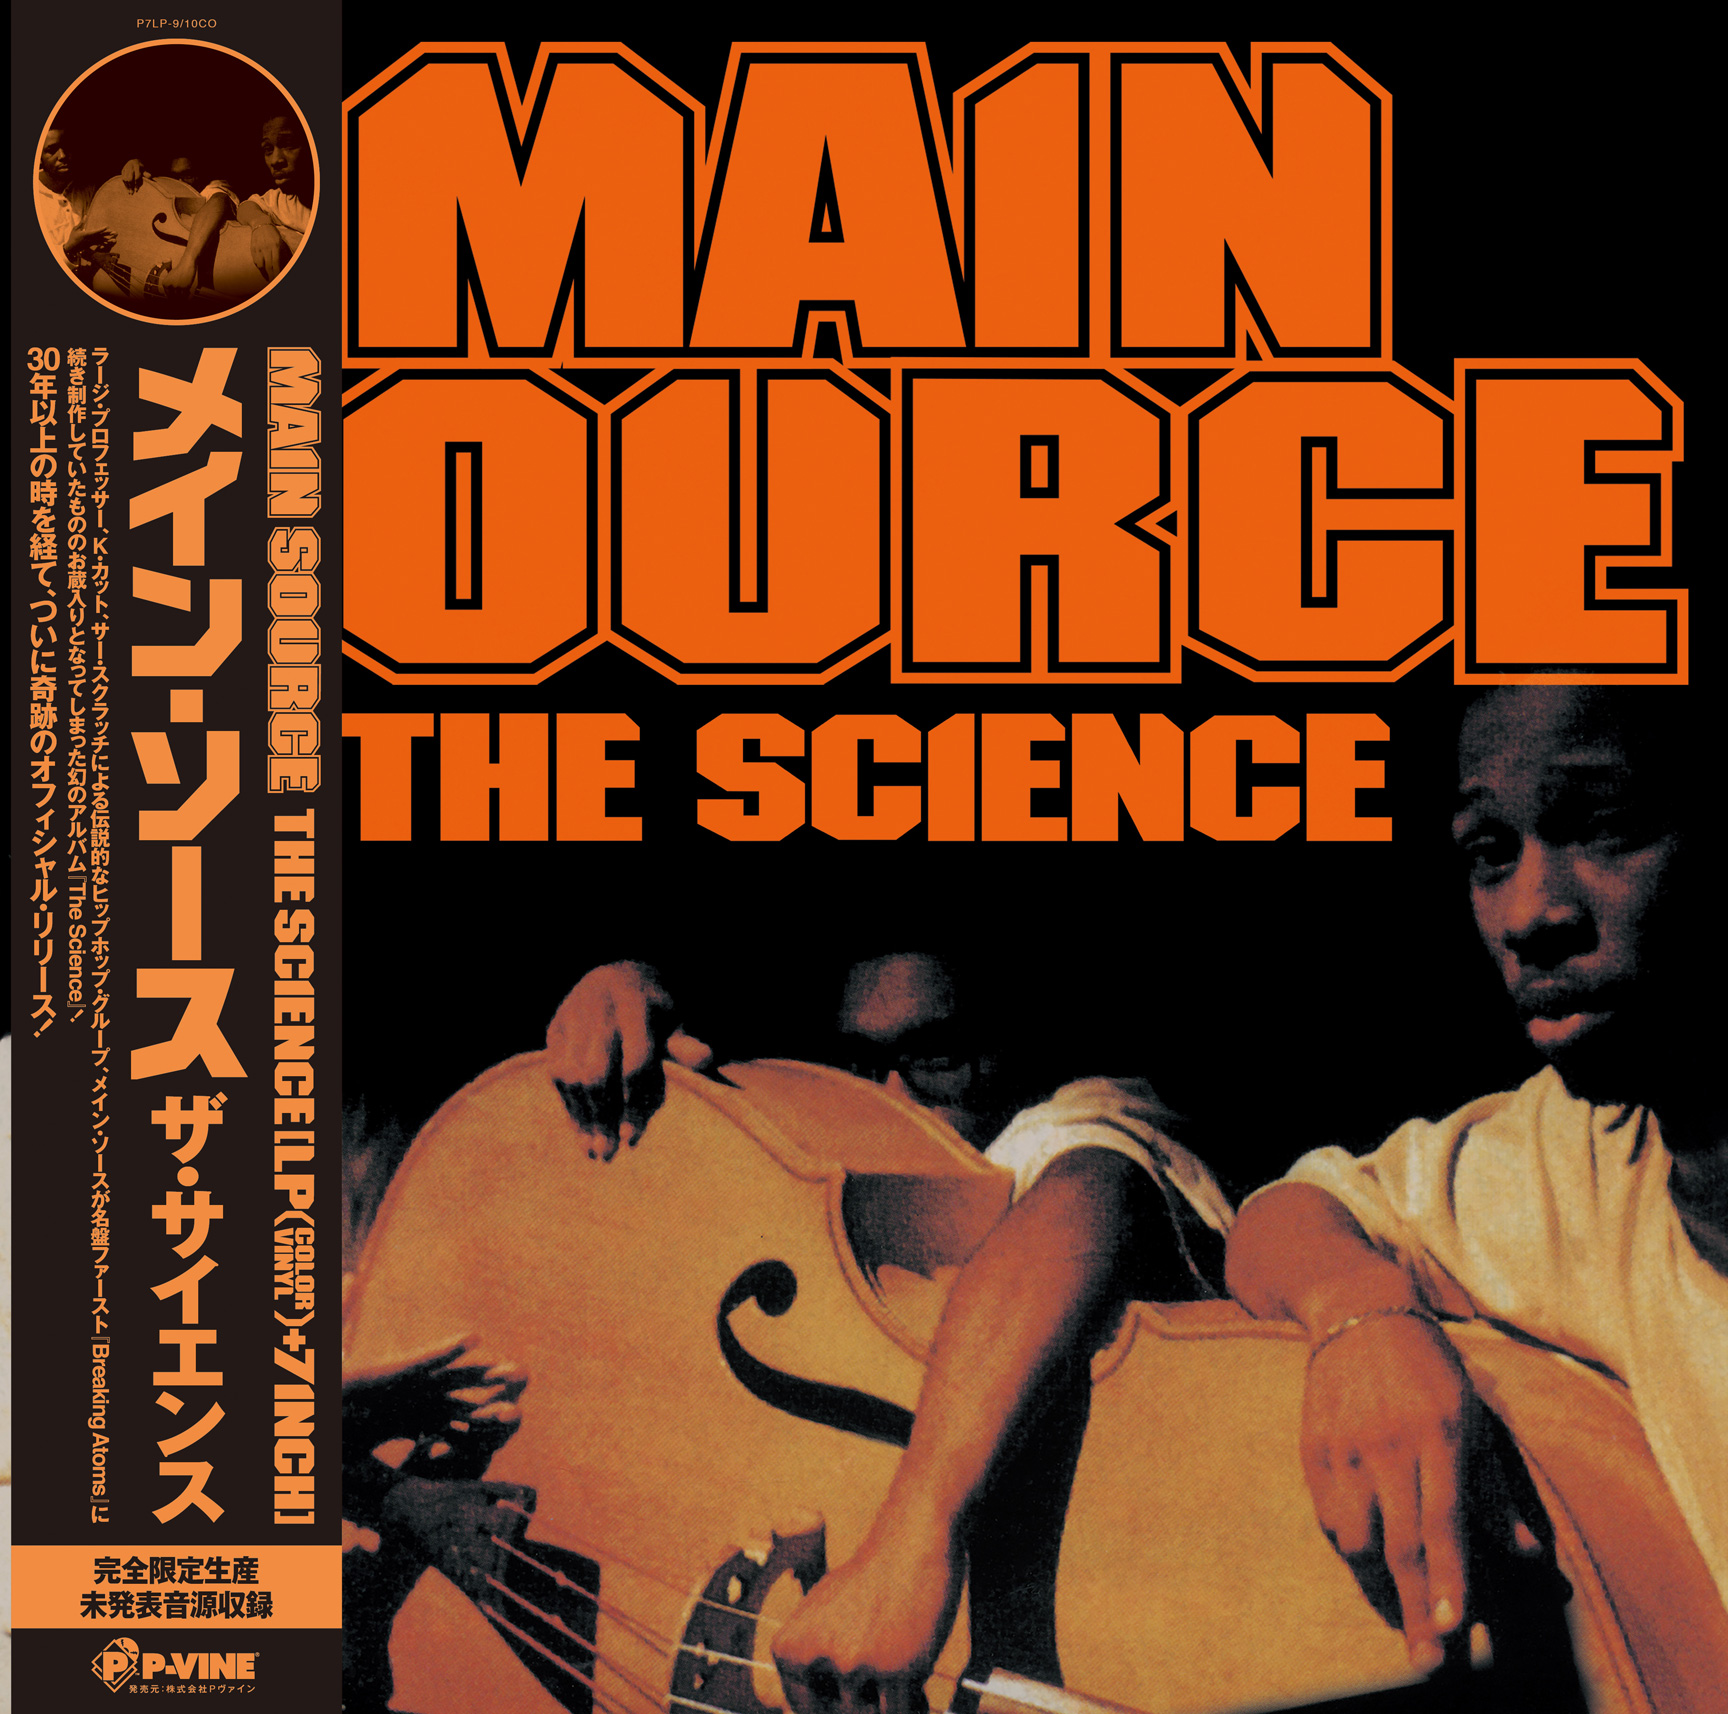 The Science (LP+7inch)